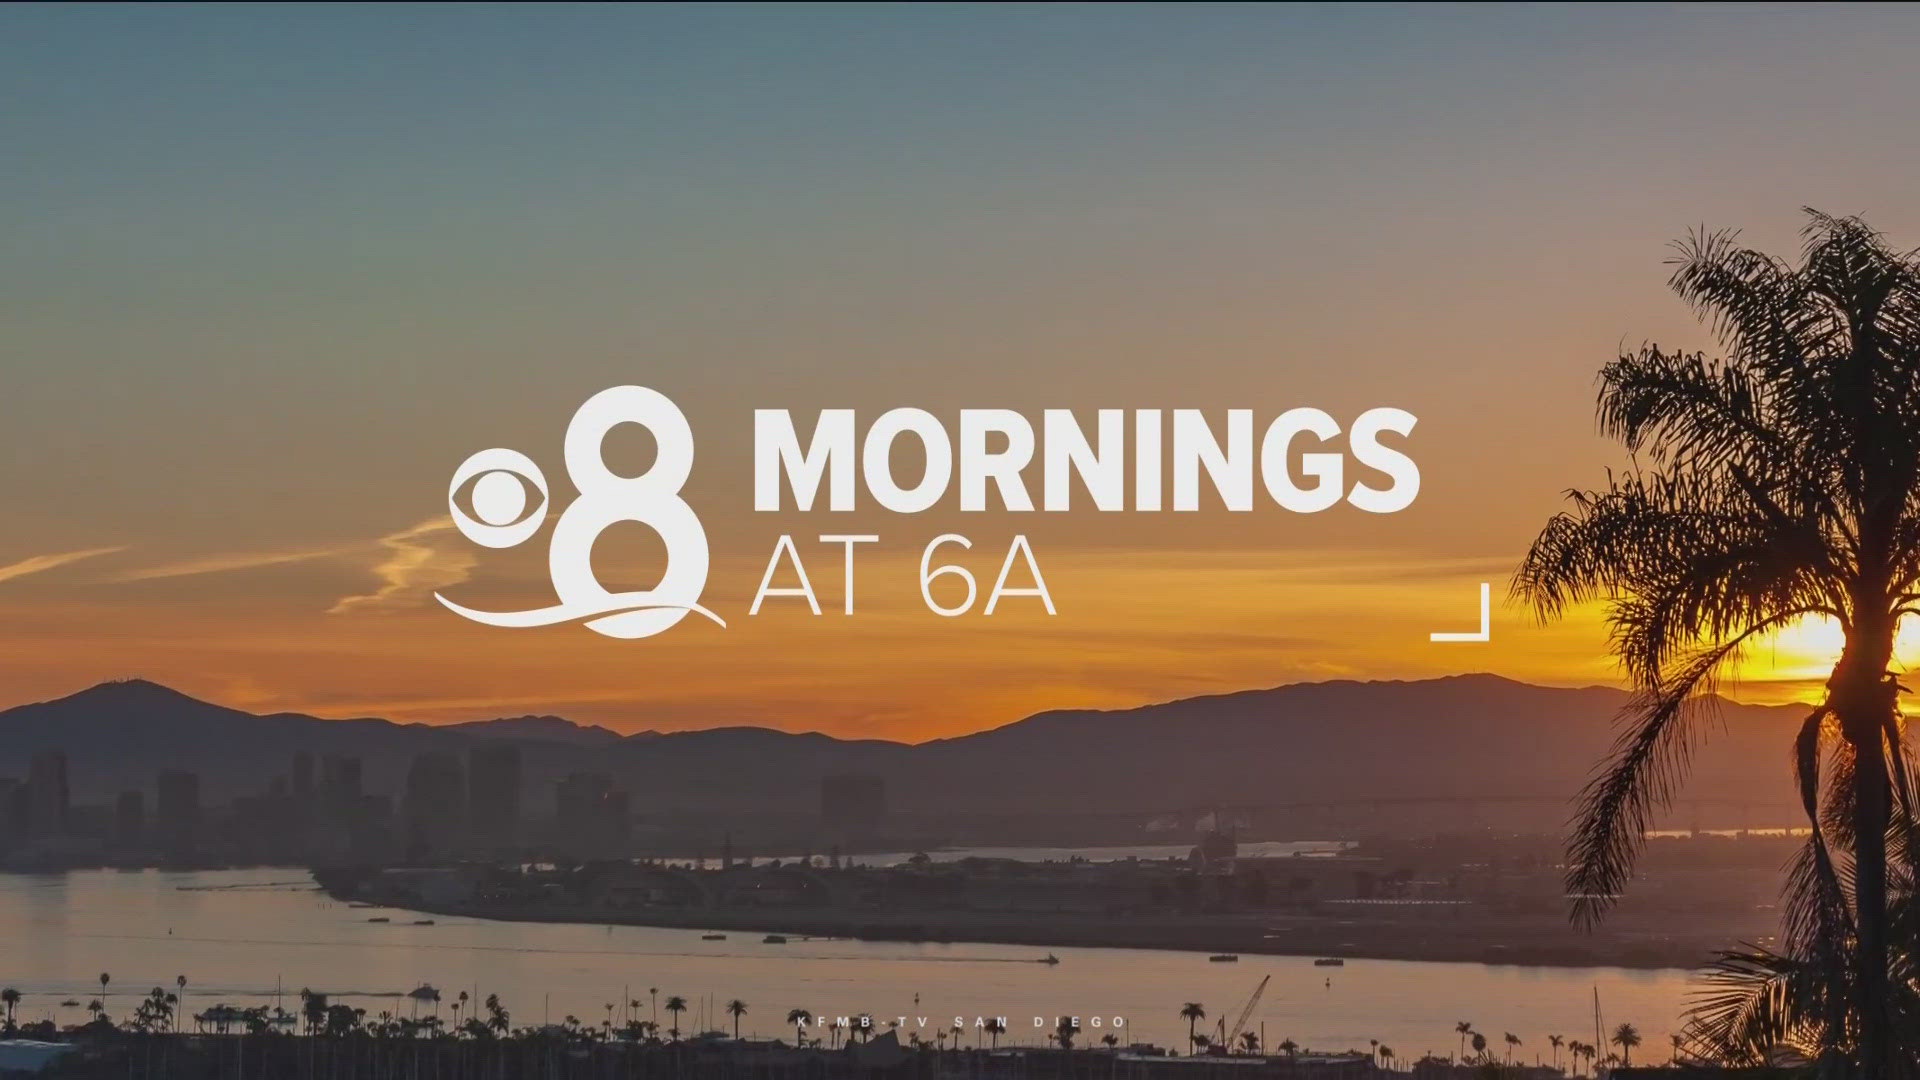 Here are the top stories around San Diego County for the morning of Tuesday, April 30.
For the latest news, weather and sports, head to:
https://www.cbs8.com/